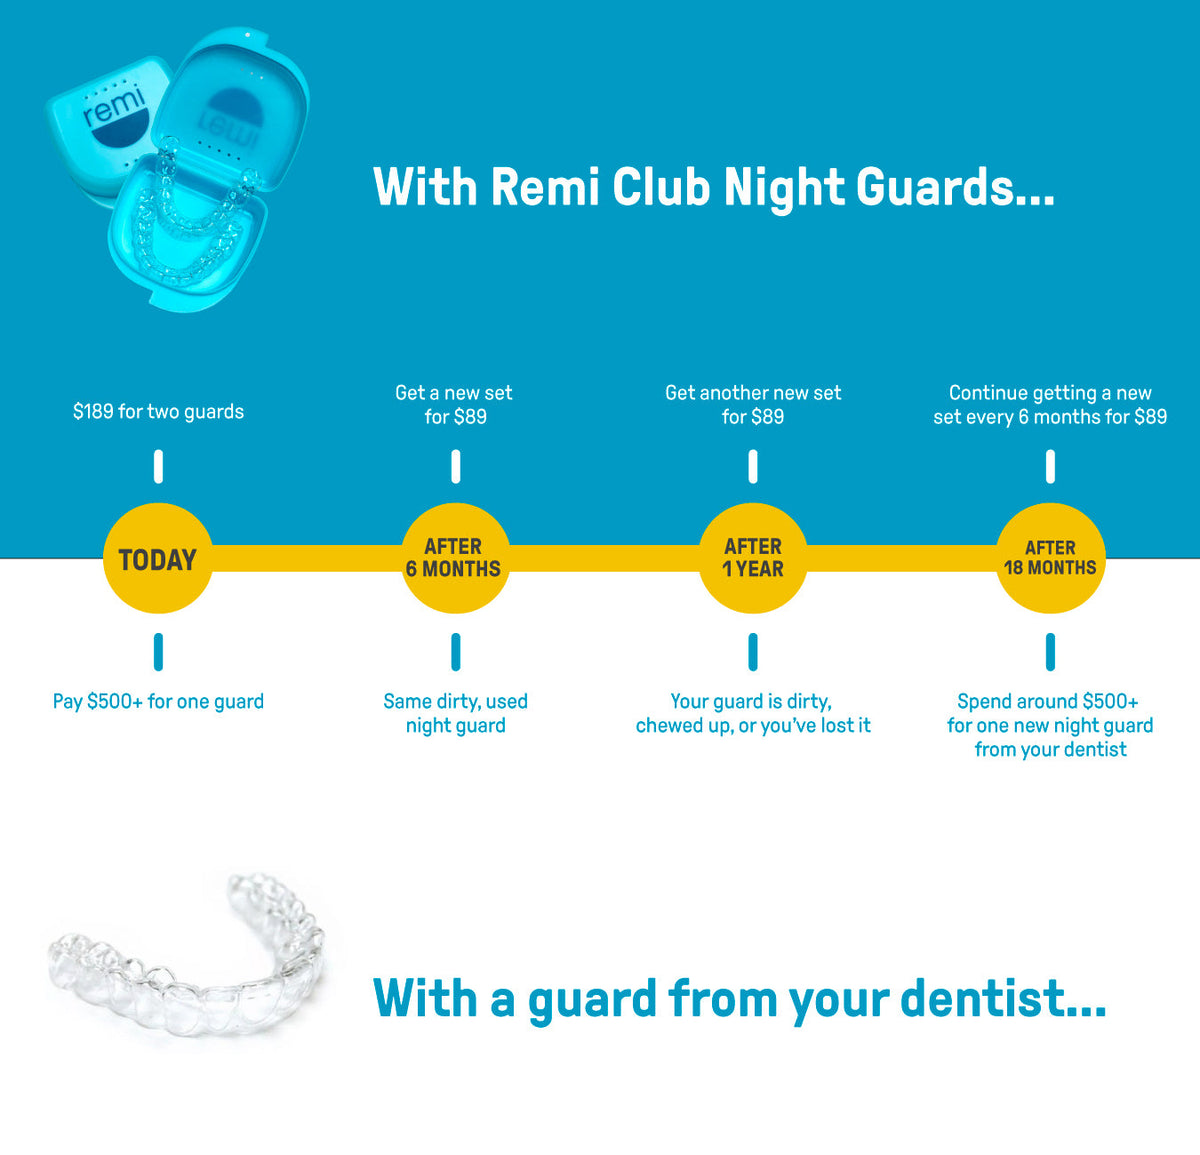 Advertisement for Custom Night Guards, depicting price plans and benefits, including images of clear dental-grade quality guards and a timeline of offers for teeth grinding protection.